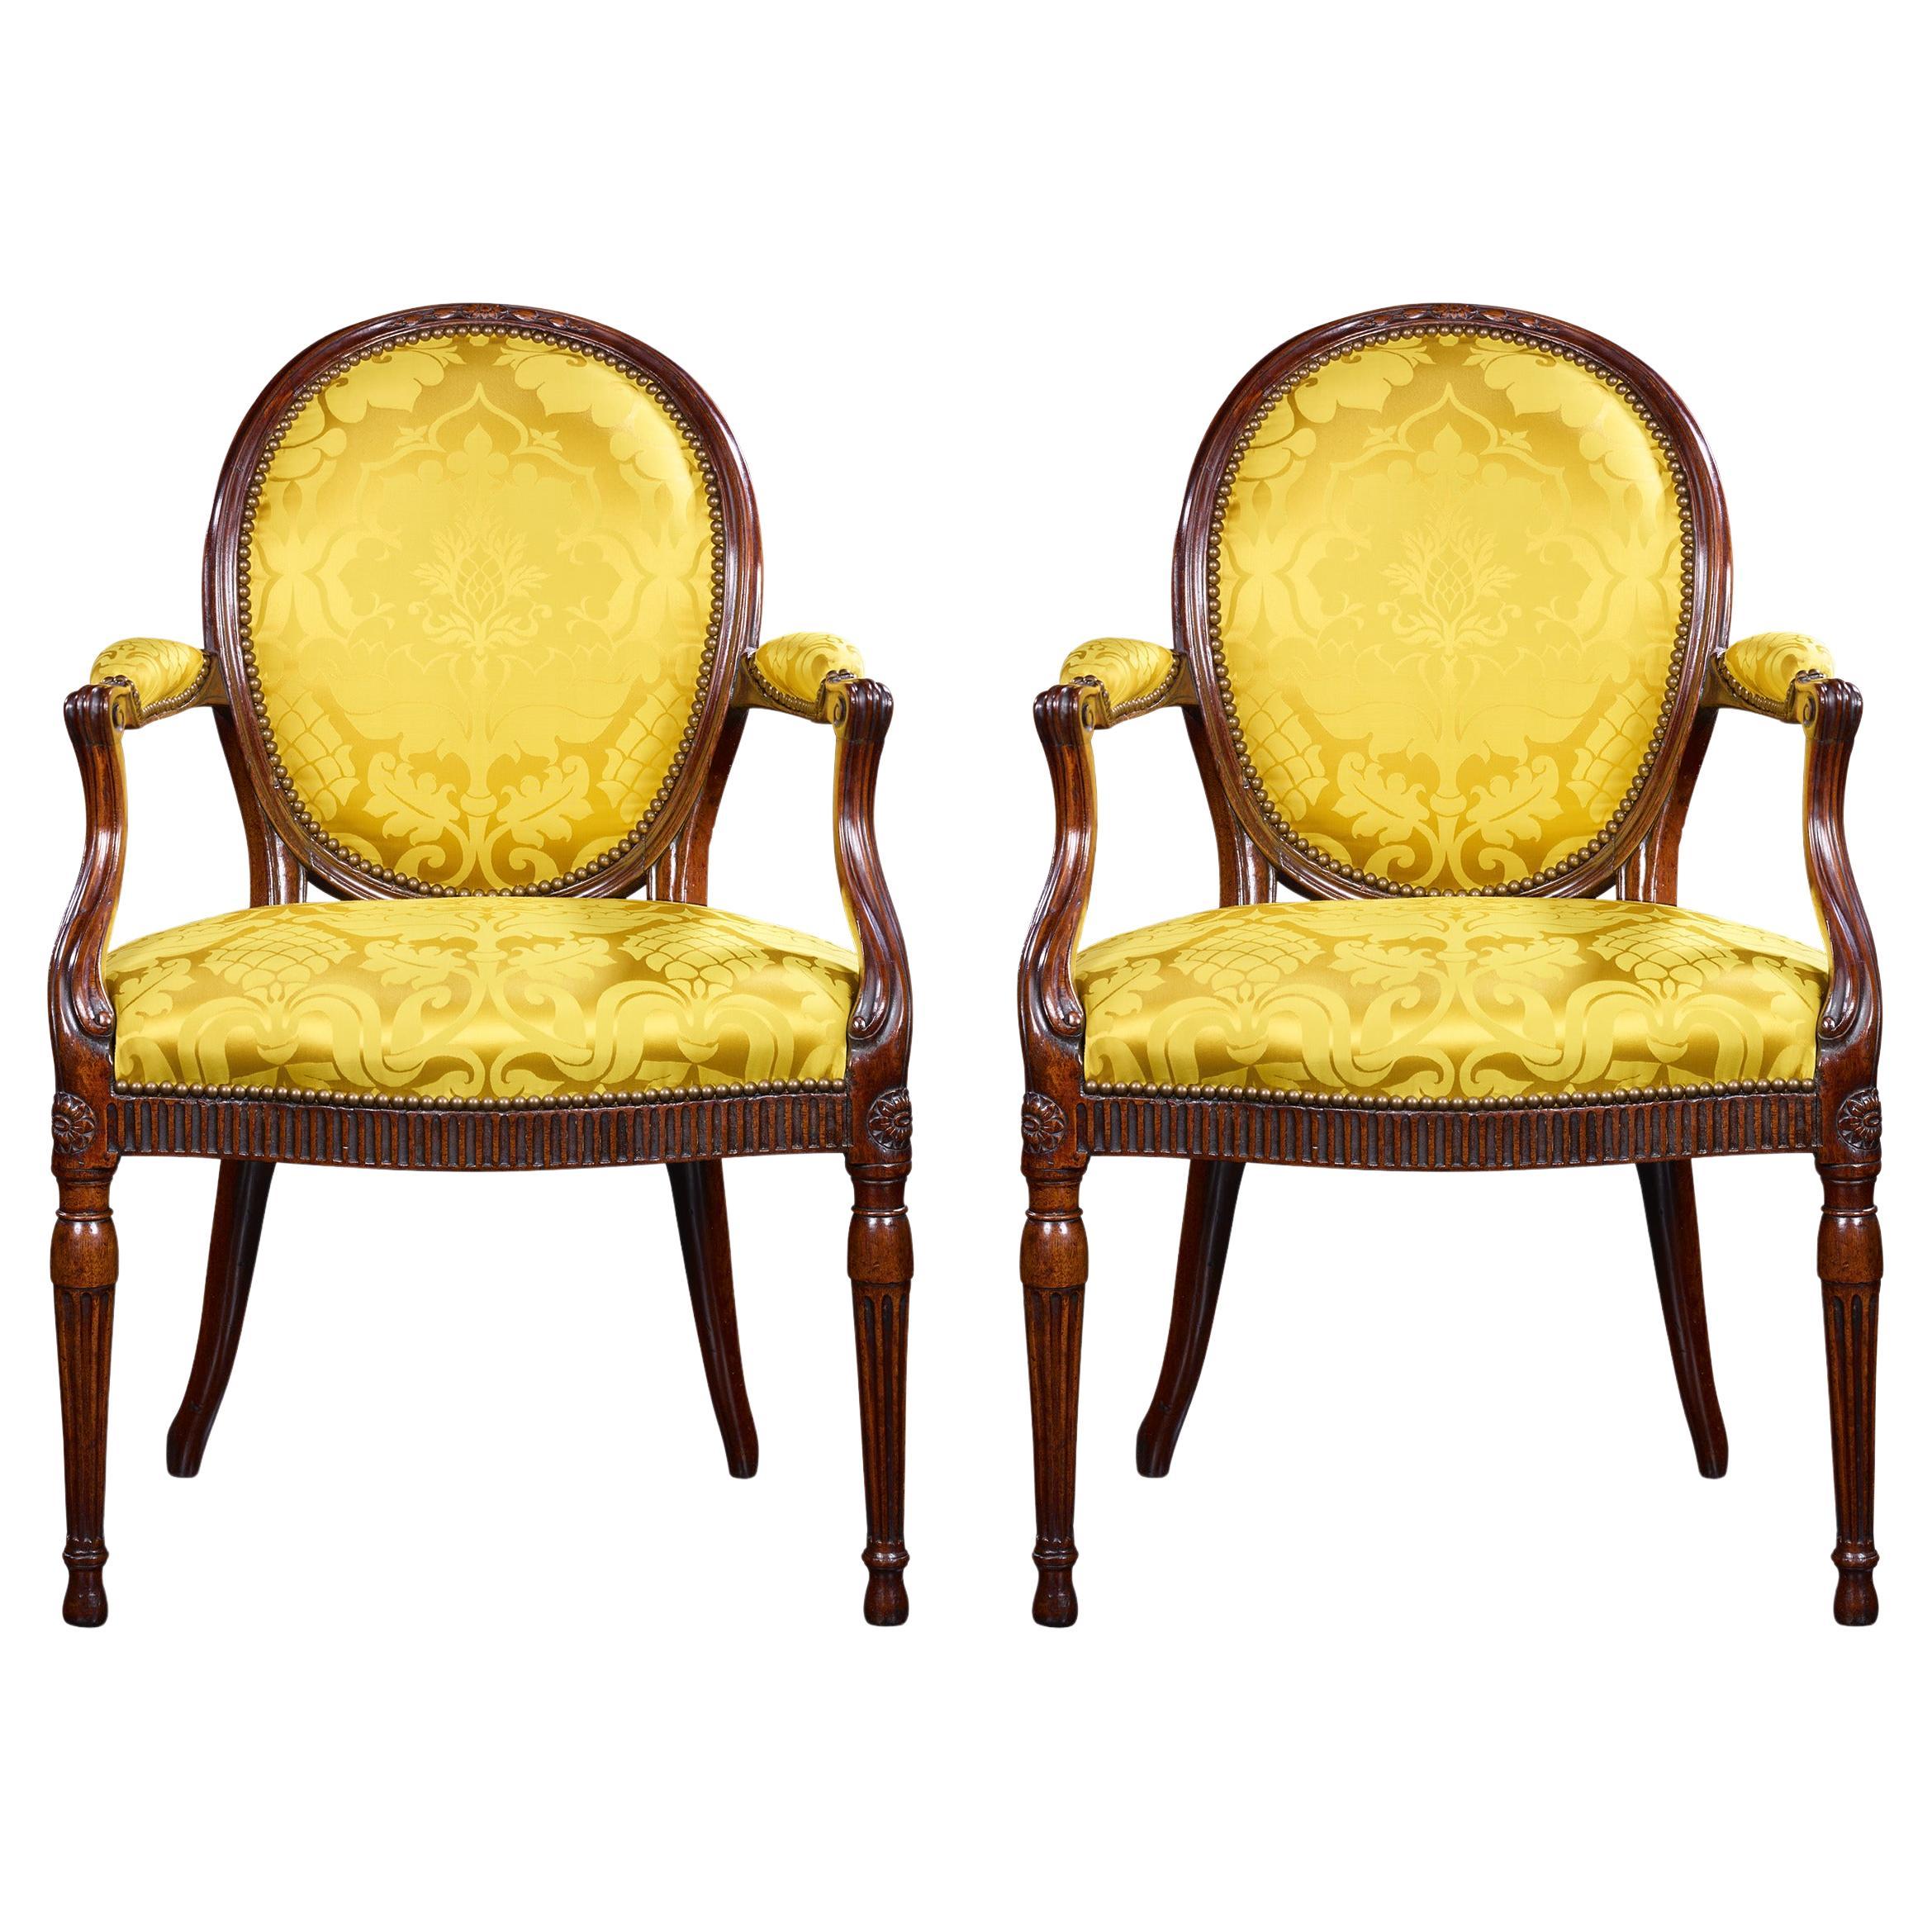 Pair Of Mahogany Armchairs By Thomas Chippendale For Sale